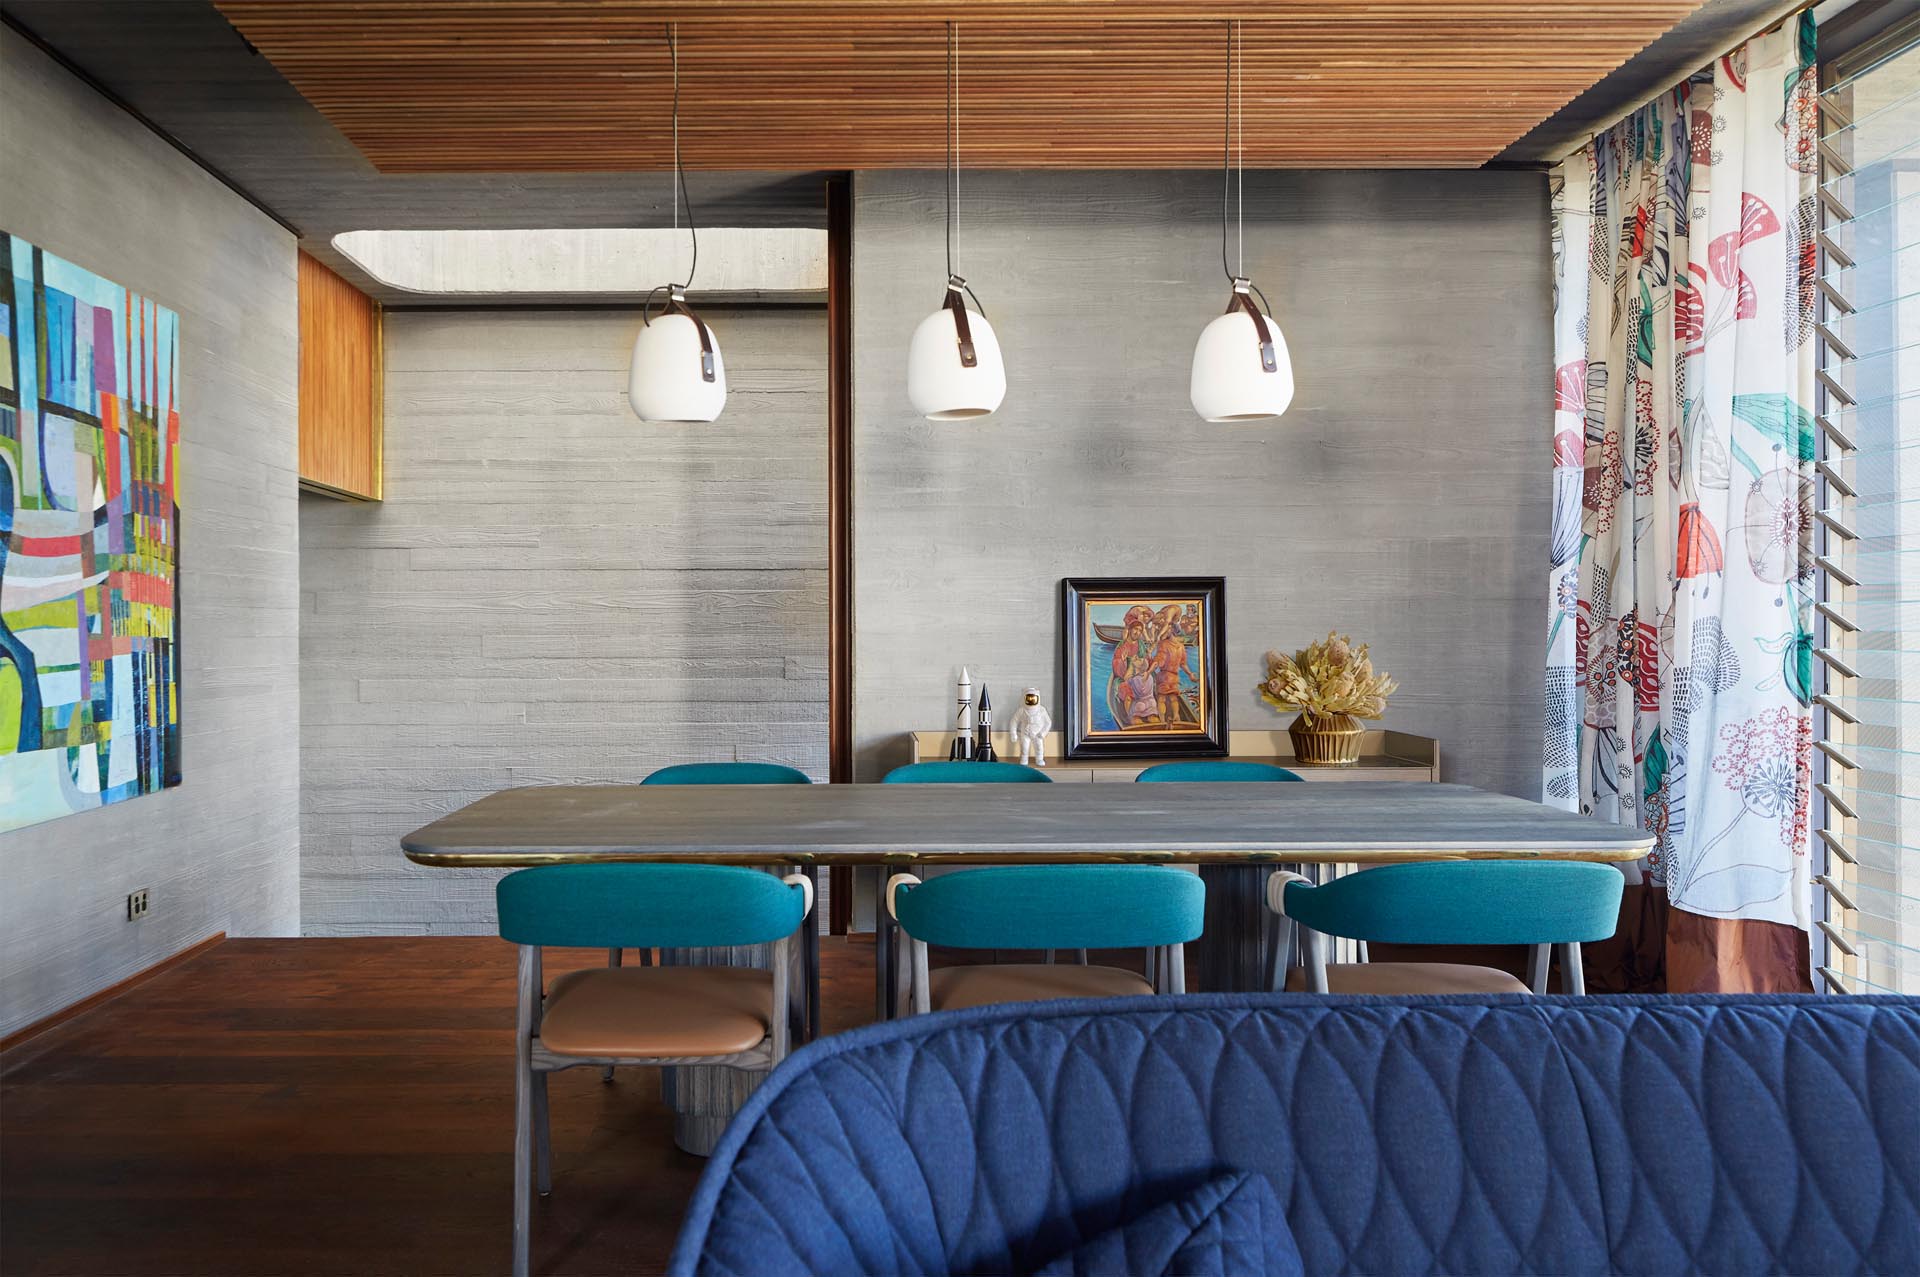 Textured concrete walls are visible in this modern dining room, that's been furnished with a wood table, dining chairs with blue accents, and three white pendant lamps.